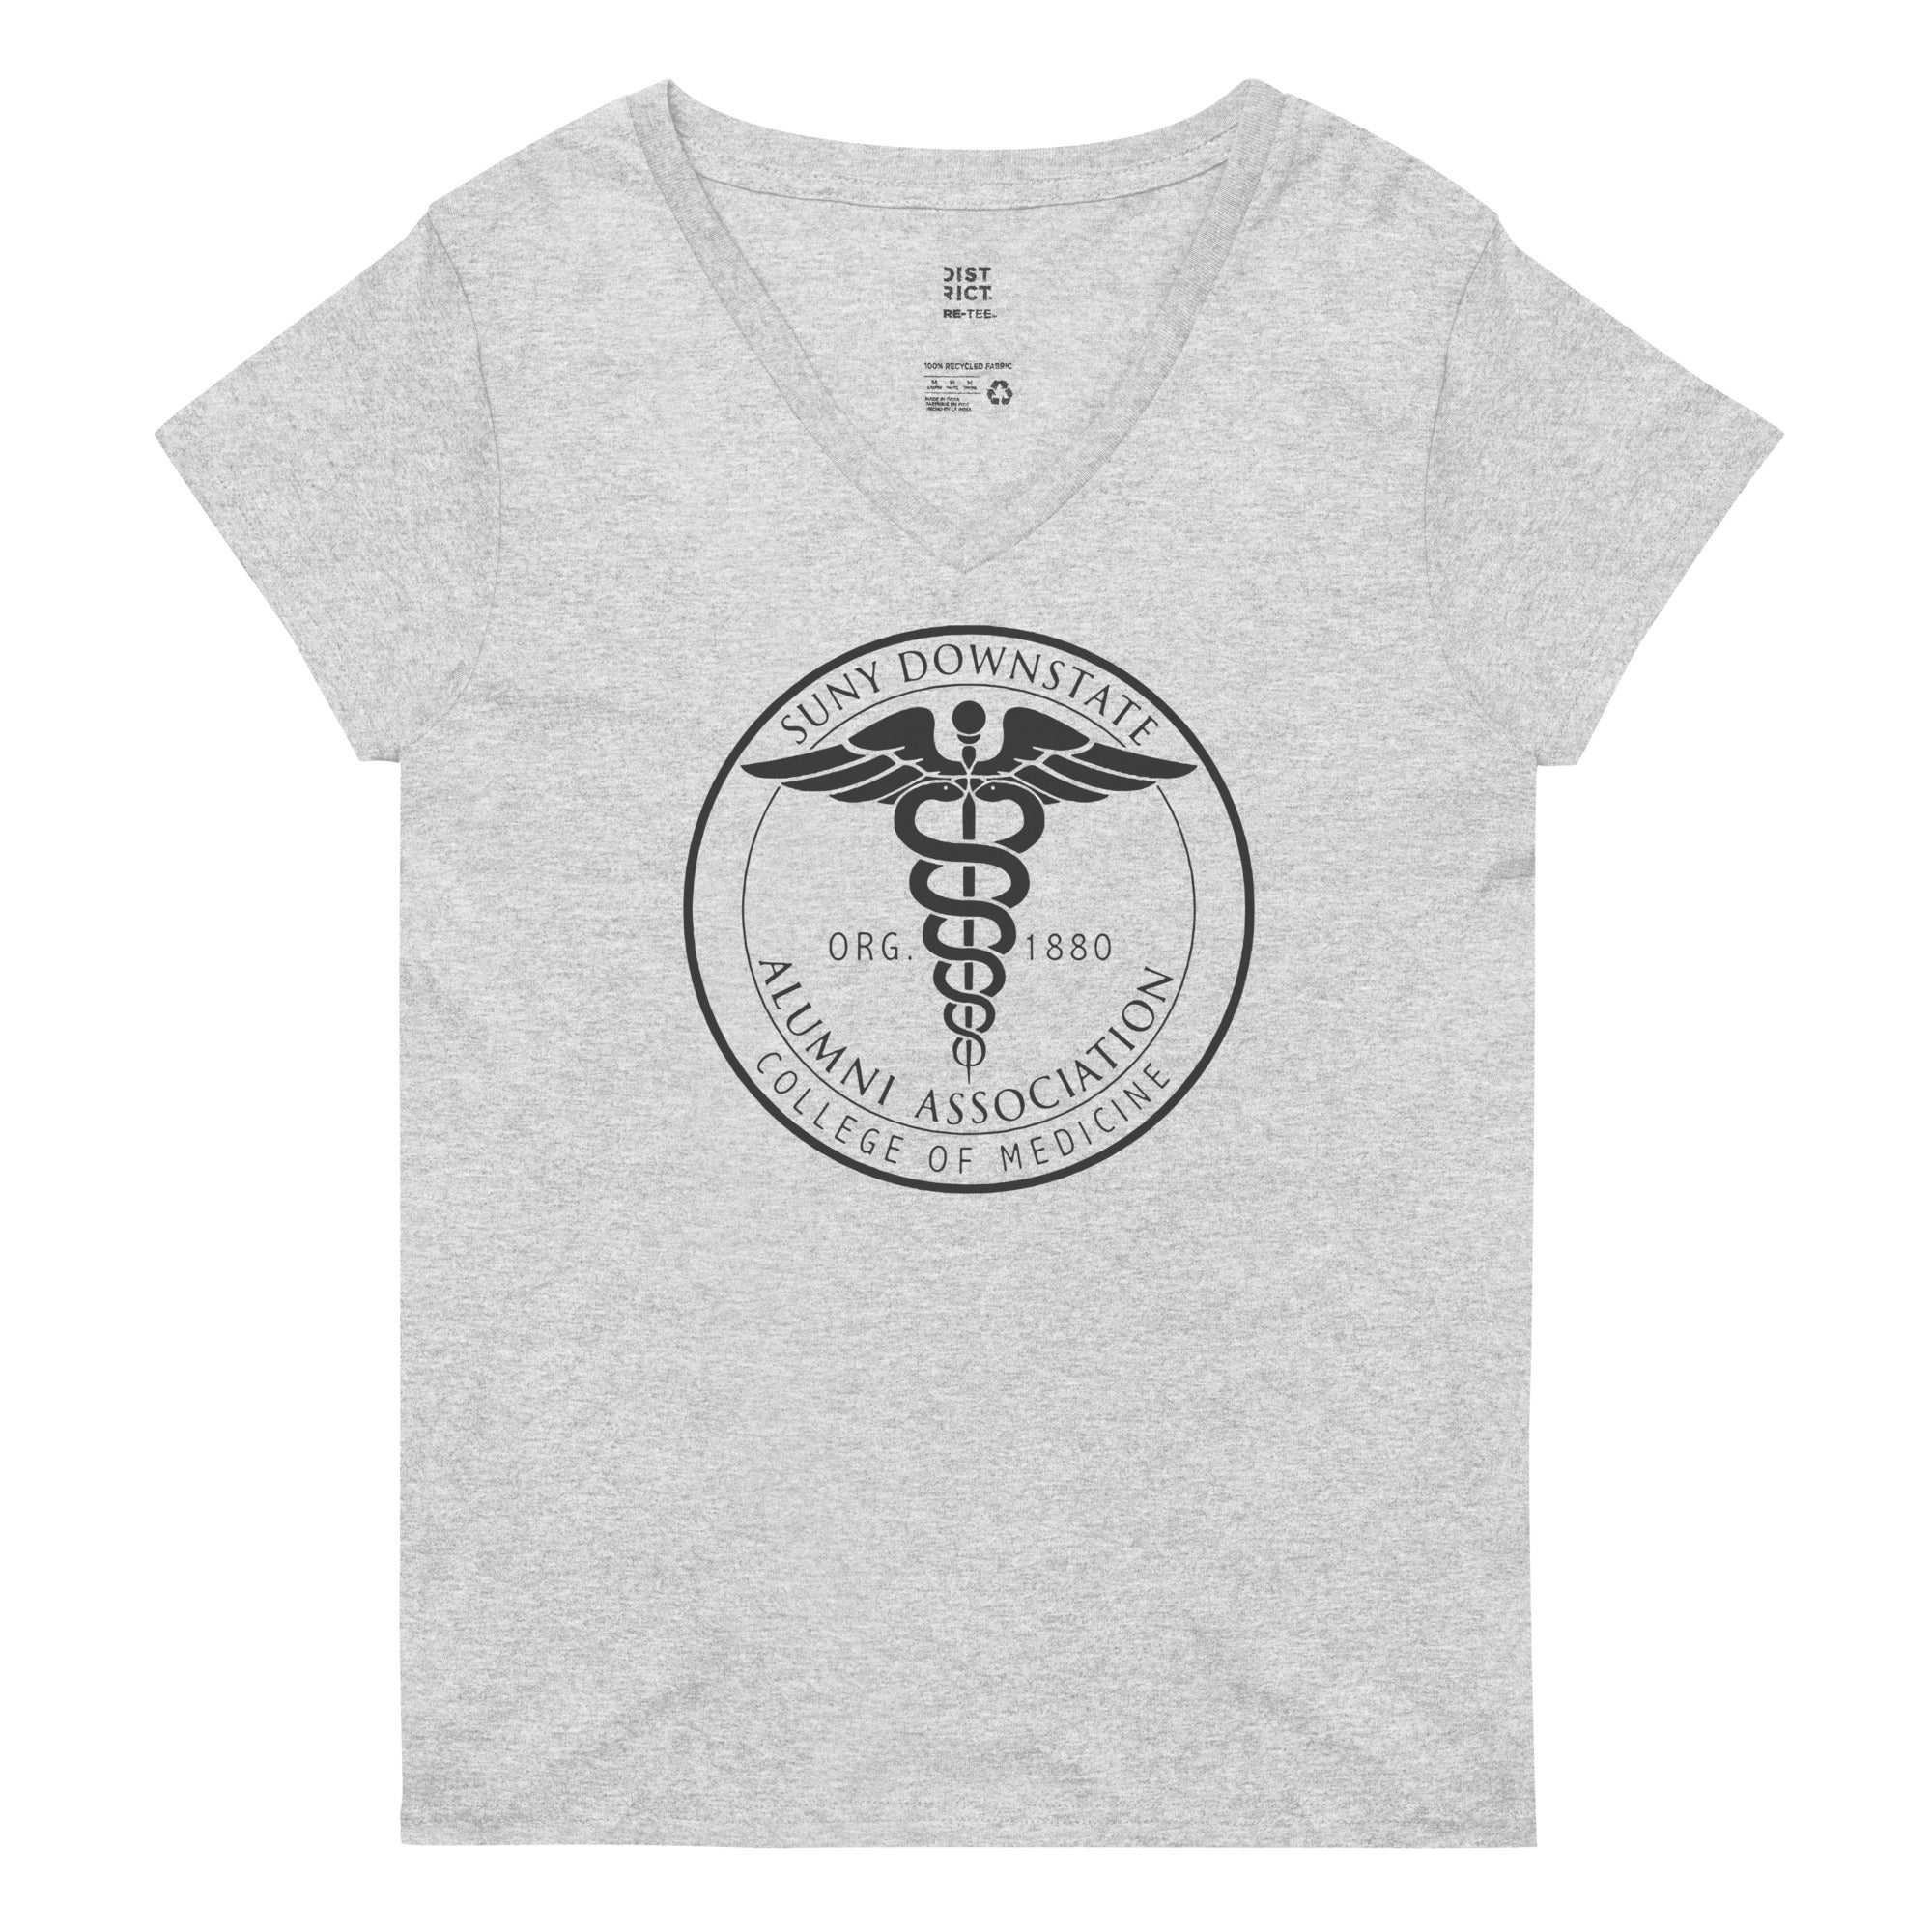 AACMSD Women’s recycled v-neck t-shirt